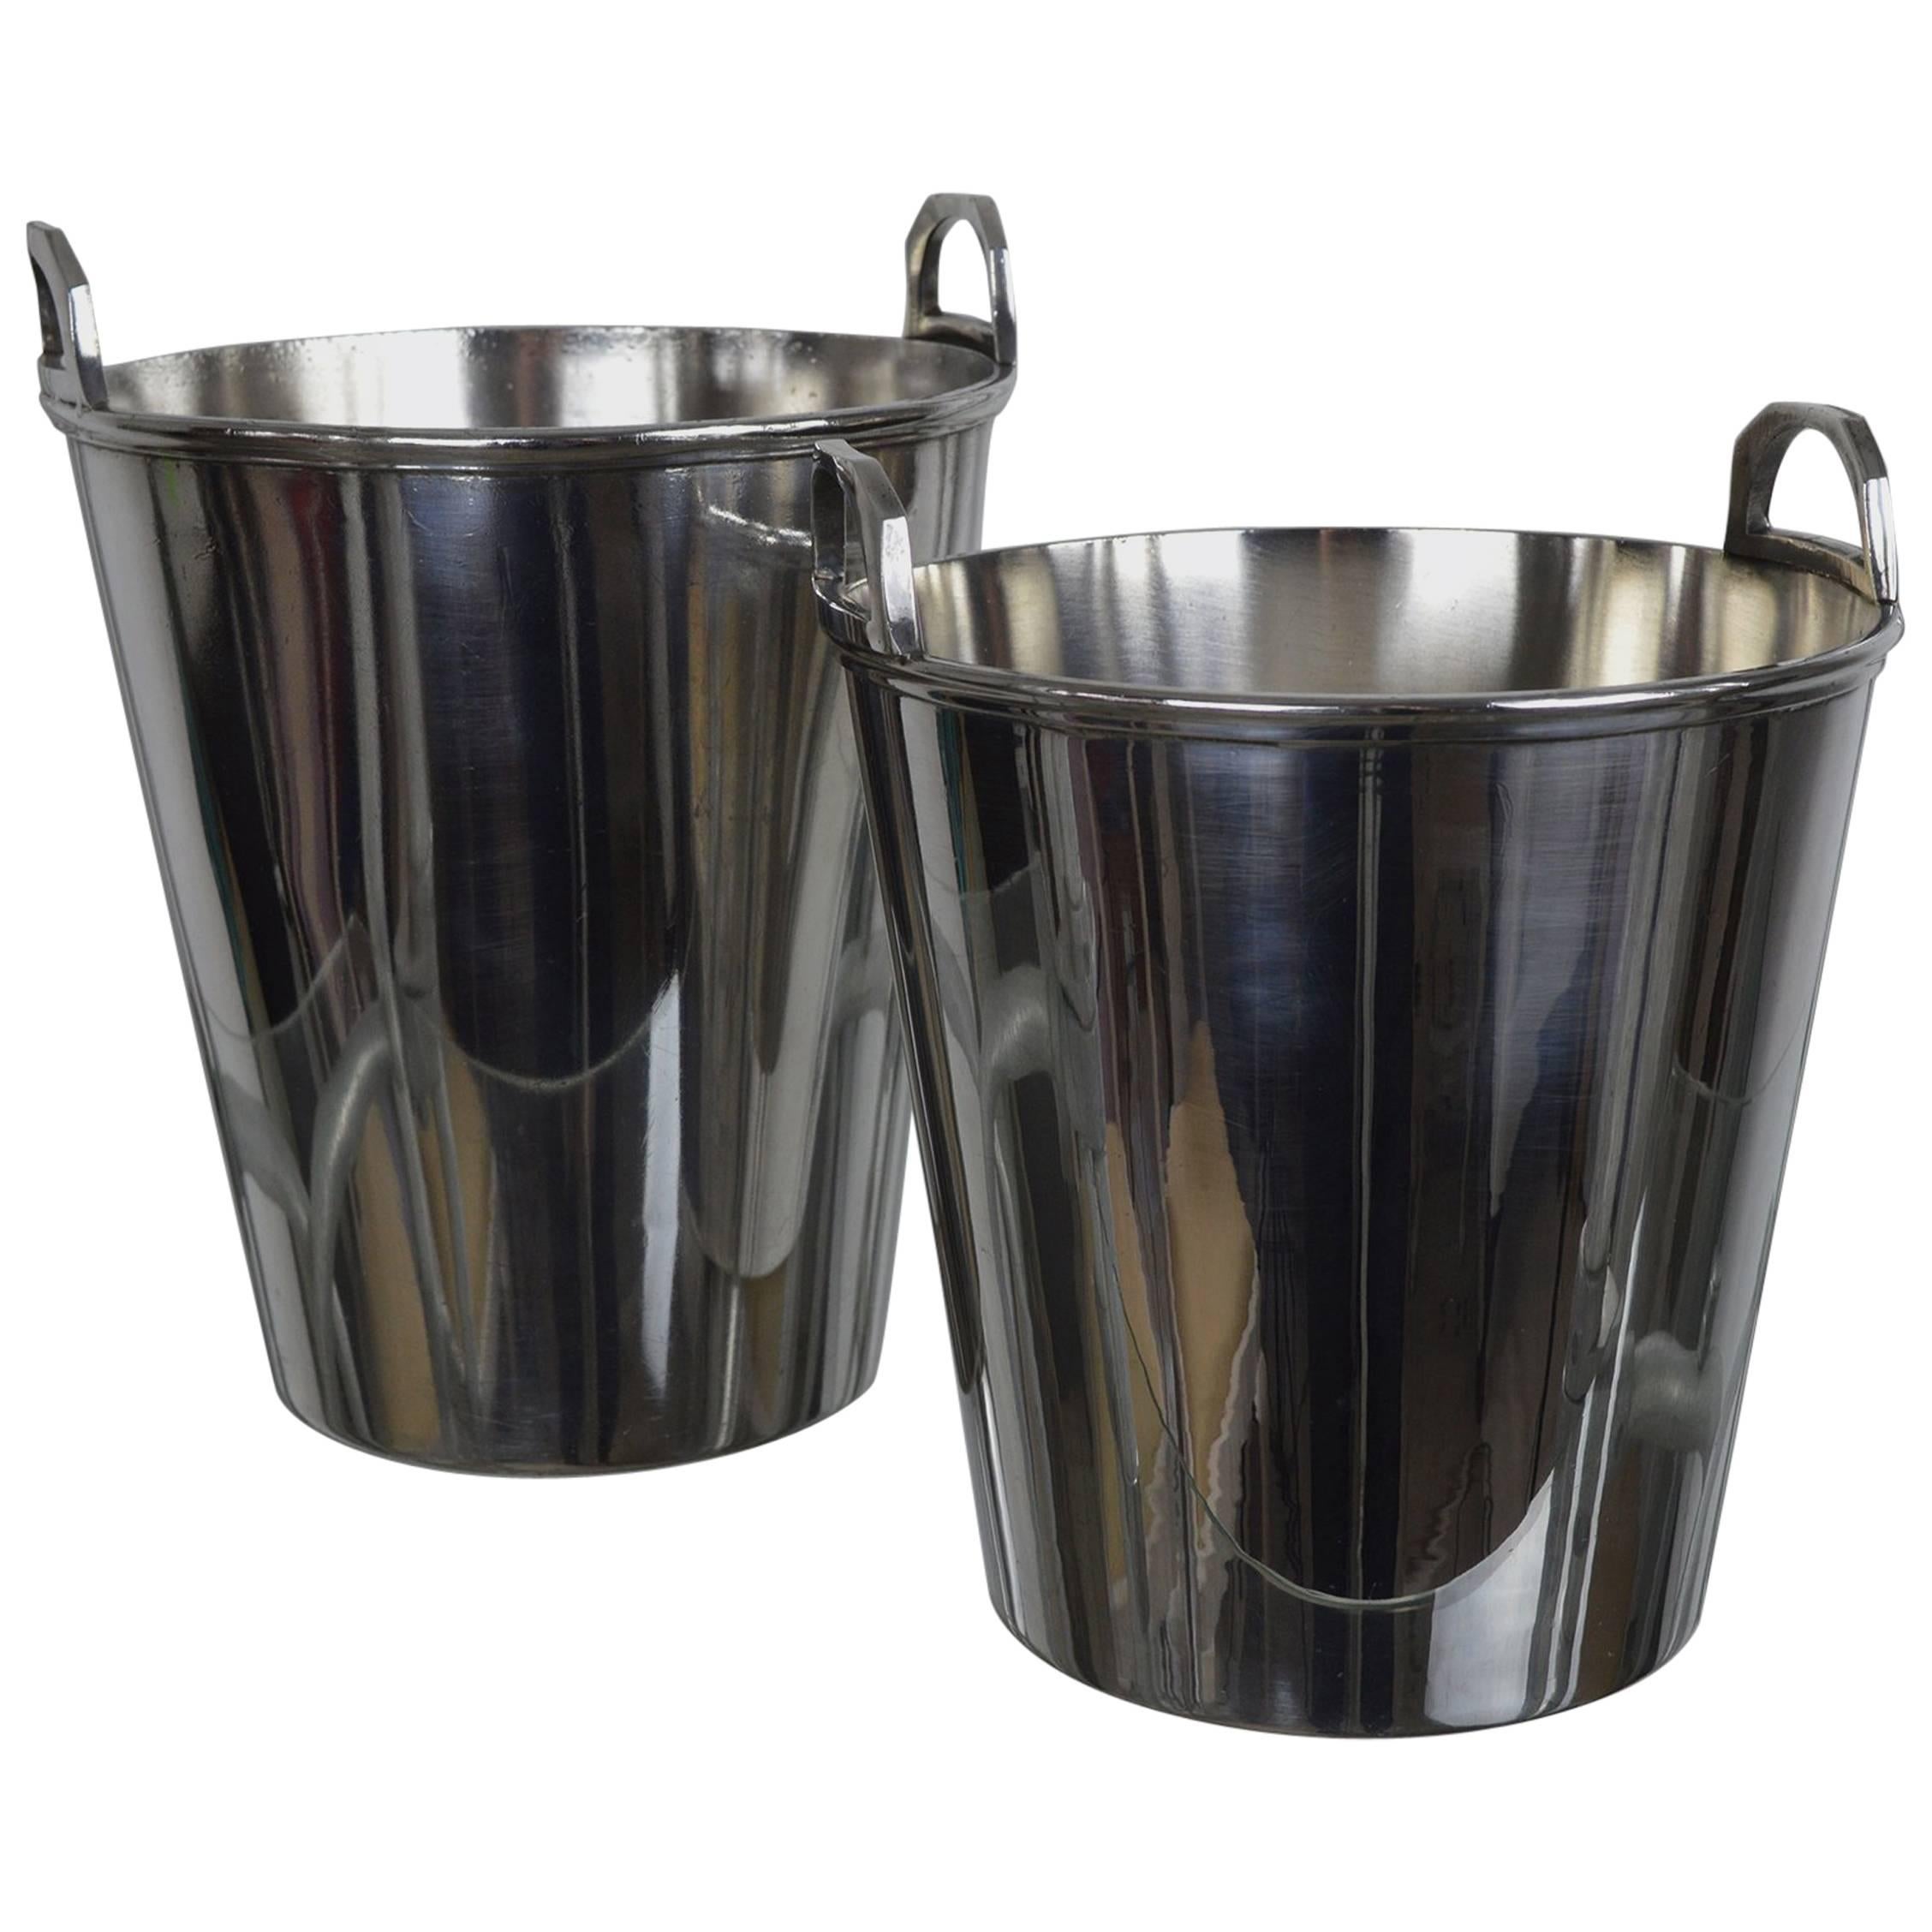 Two Vintage Art Deco Style Silver Plated Ice Buckets